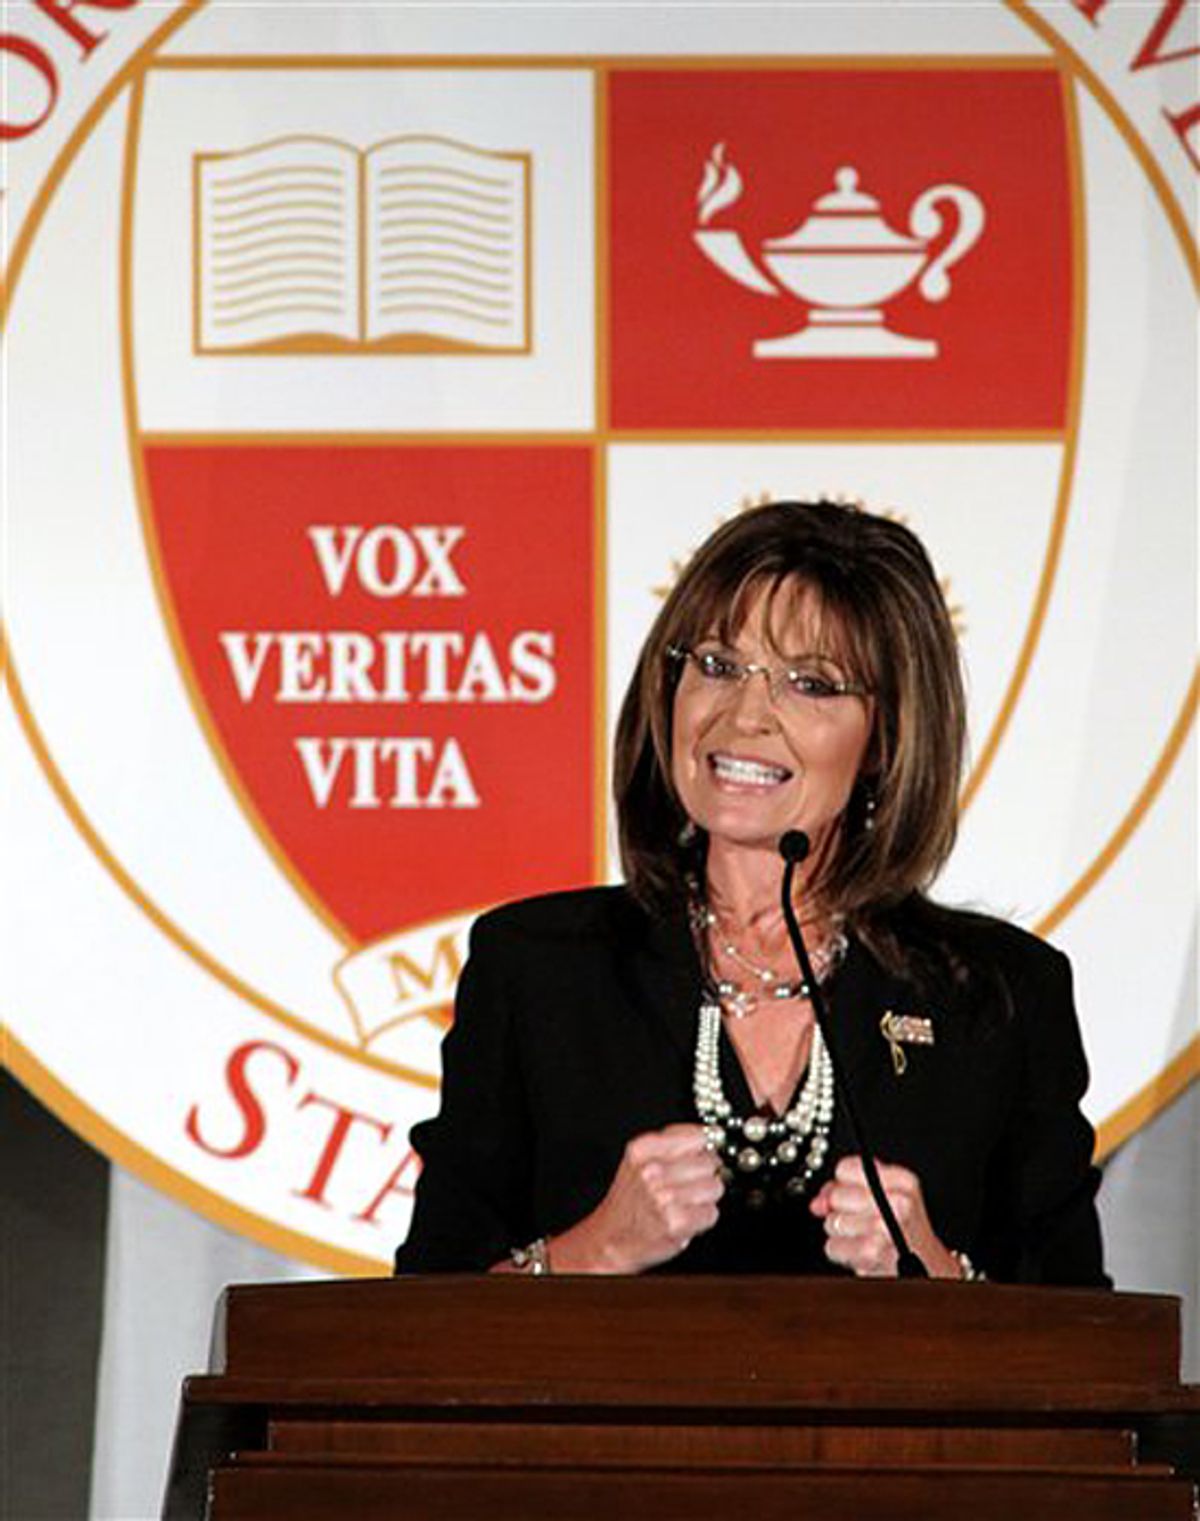 Former Republican vice presidential candidate Sarah Palin gestures during her speech at a fundraising dinner at California State University, Stanislaus in Turlock, Calif., Friday, June 25, 2010.  Palin's  speech has generated intense scrutiny since the nonprofit foundation holding the event first announced her visit in March.  University officials have refused to divulge the terms of her contract or her speaking fee.(AP Photo/Rich Pedroncelli) (Rich Pedroncelli)